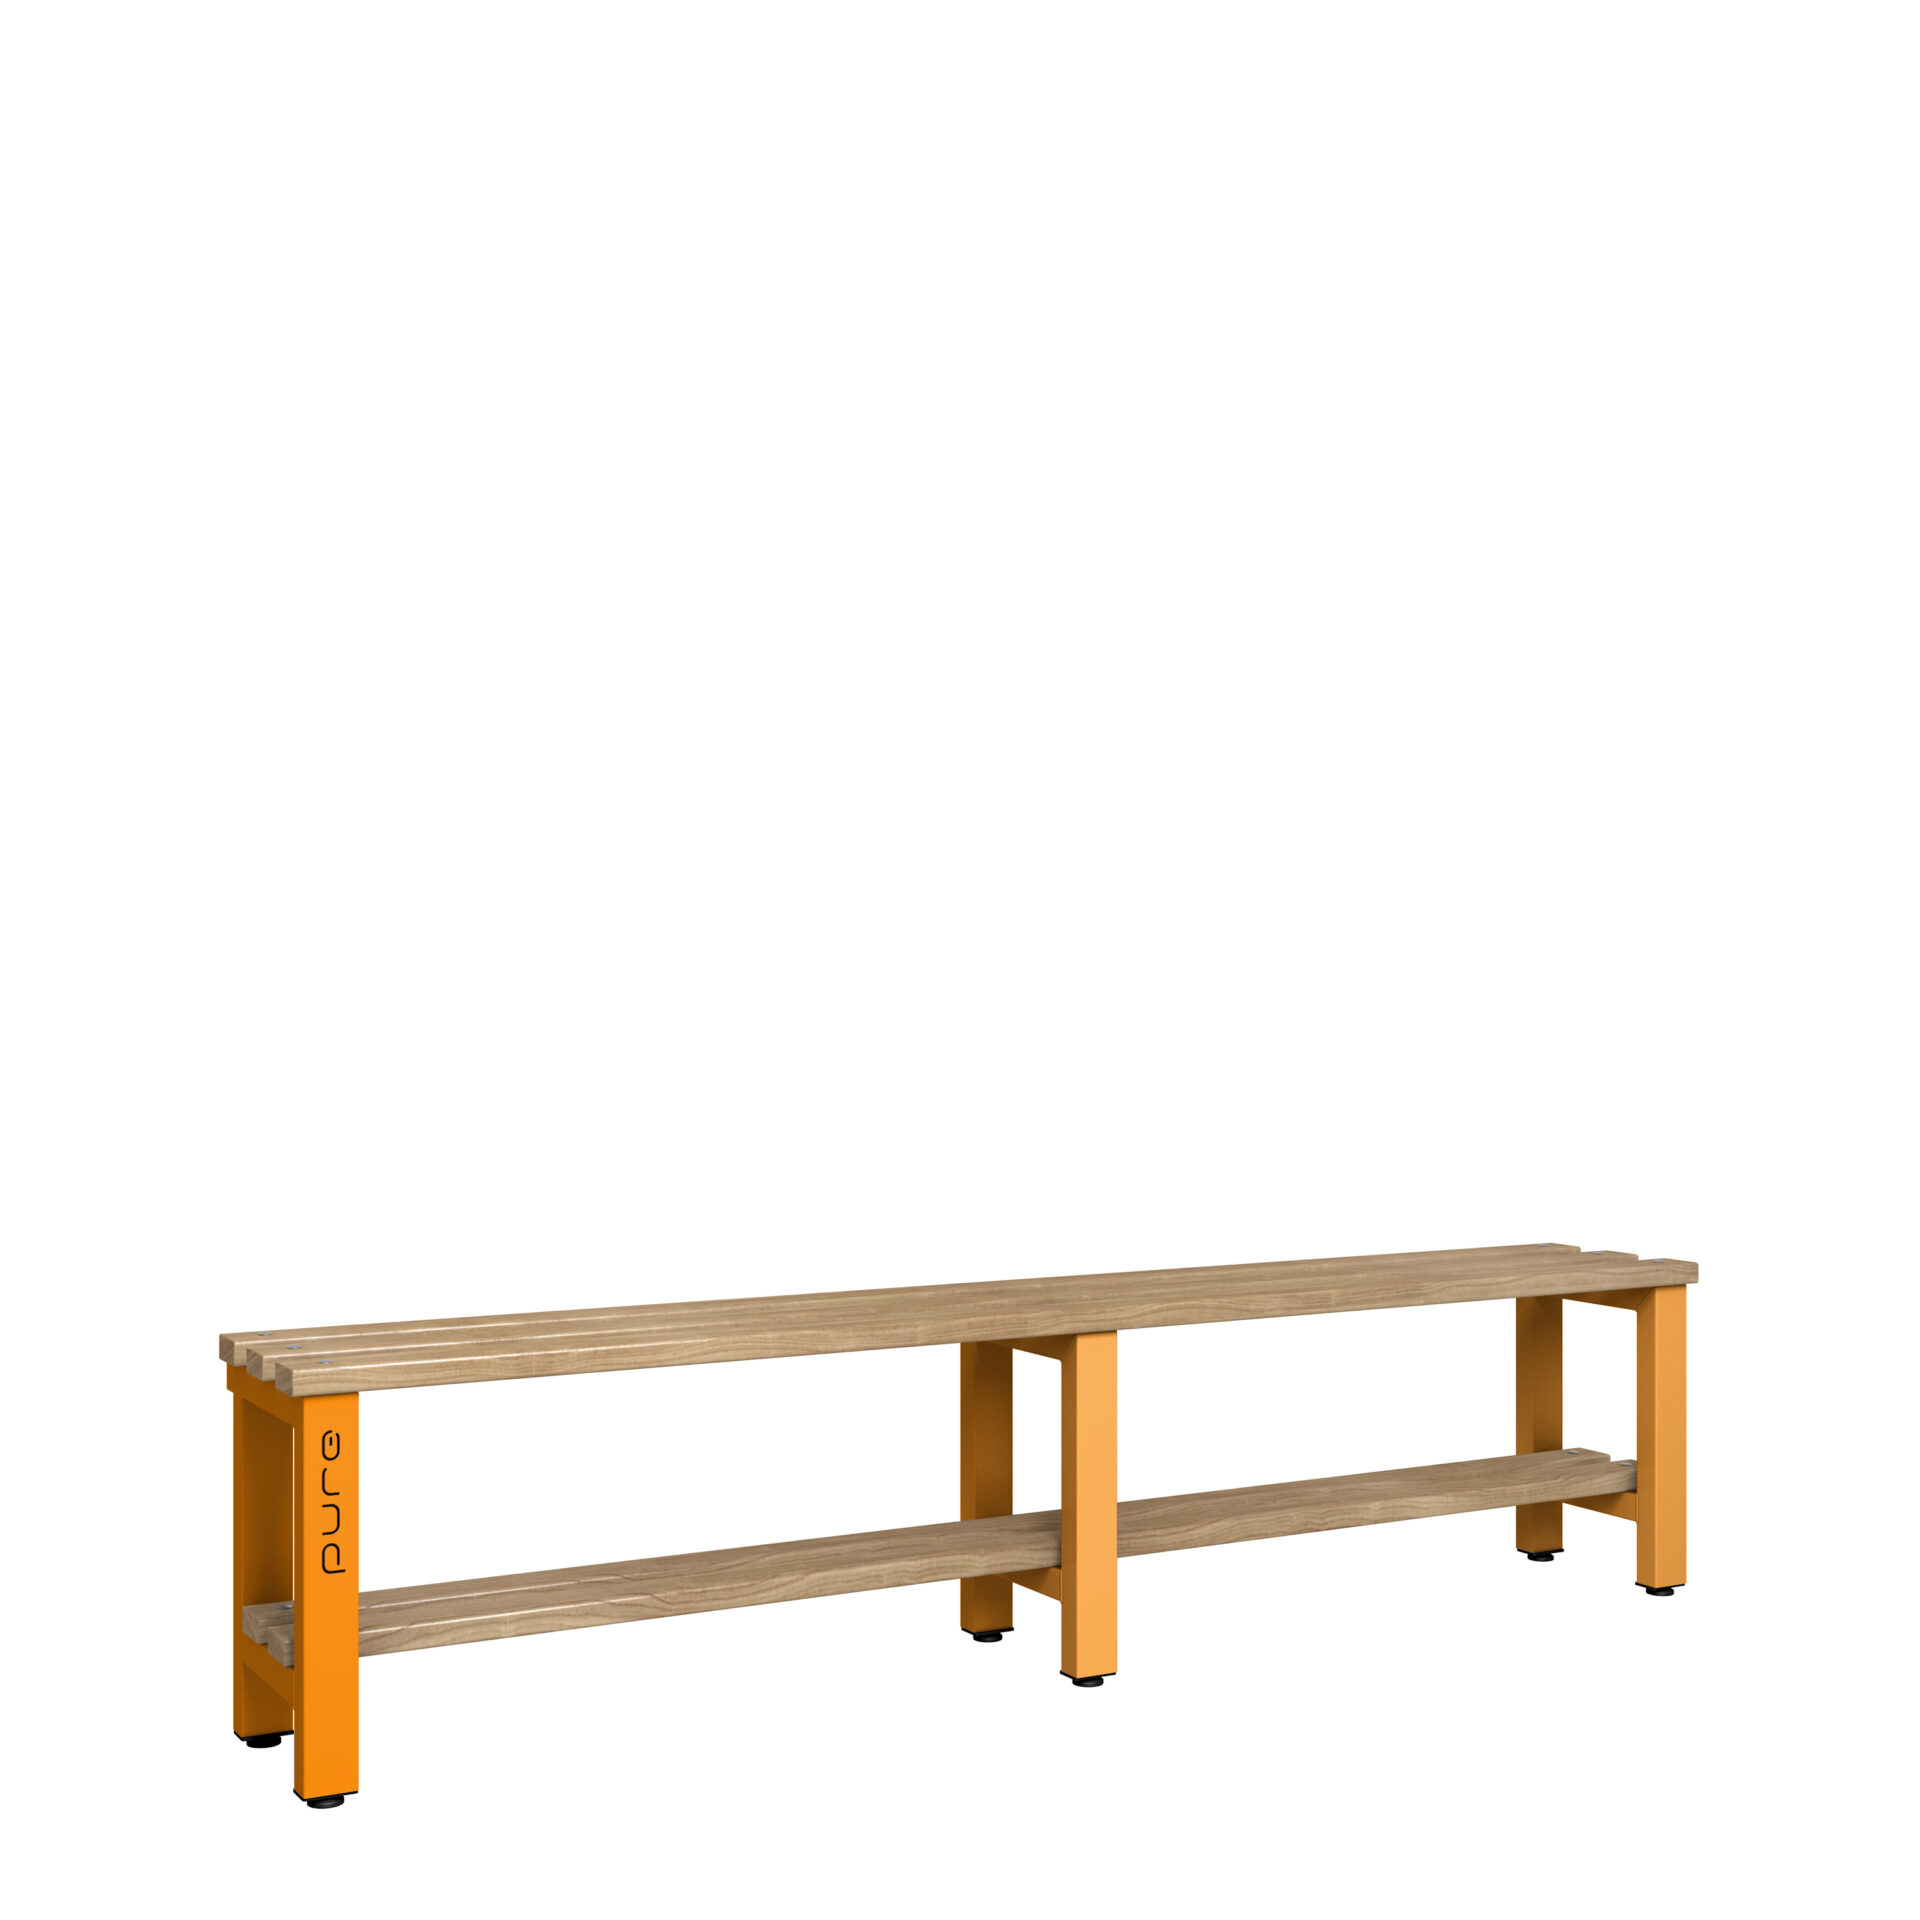 Pure Carbon Zero Single Sided 2000mm Standard Bench With Shoe Shelf - Magma Orange / Solid Timber